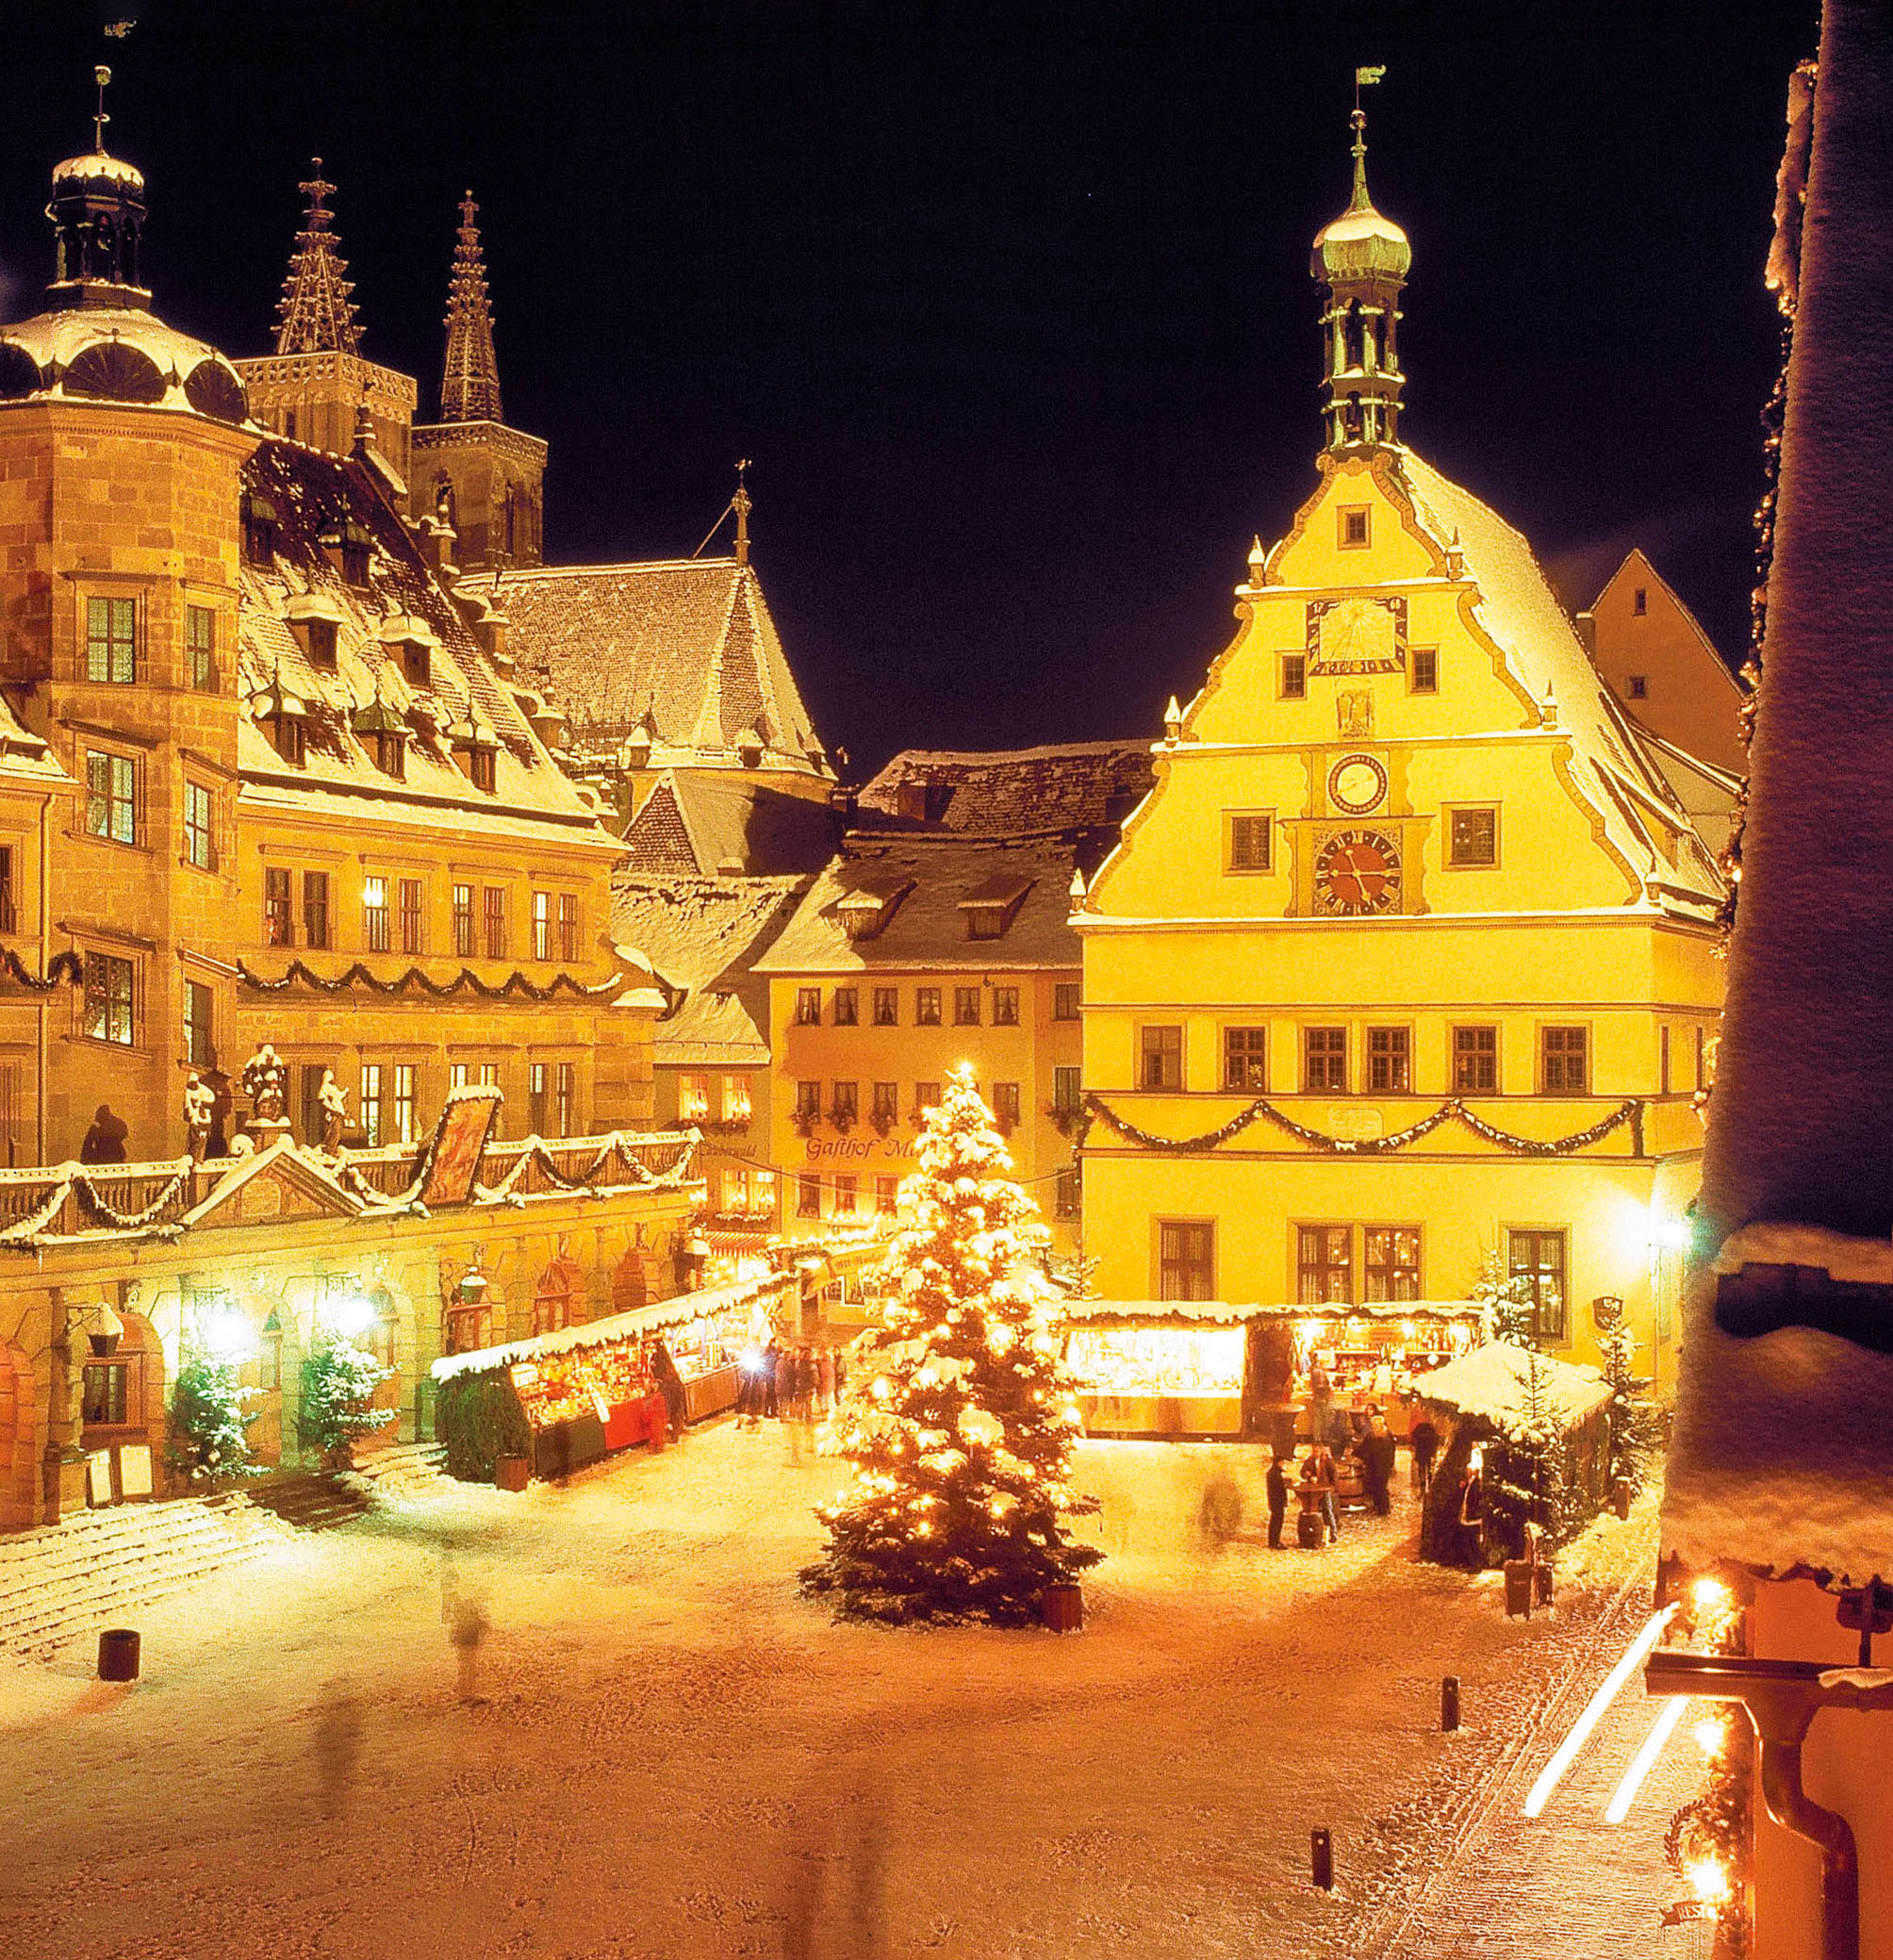 Christmas Markets in Germany - Rothenburg © Roderick Eime - licence [CC BY 2.0] from Wikimedia Commons